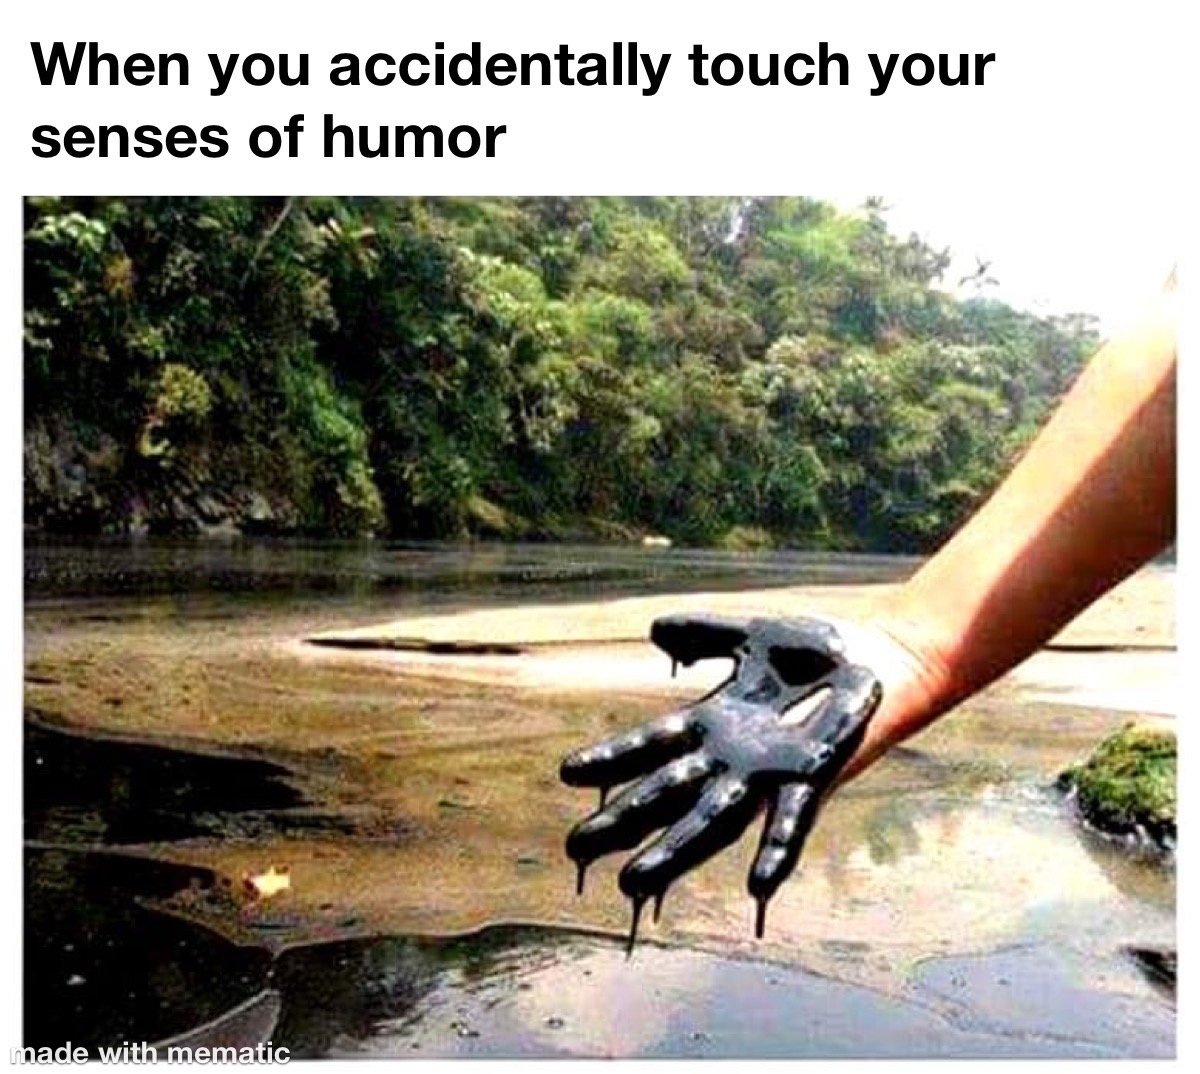 When you accidently touch your sense of humor